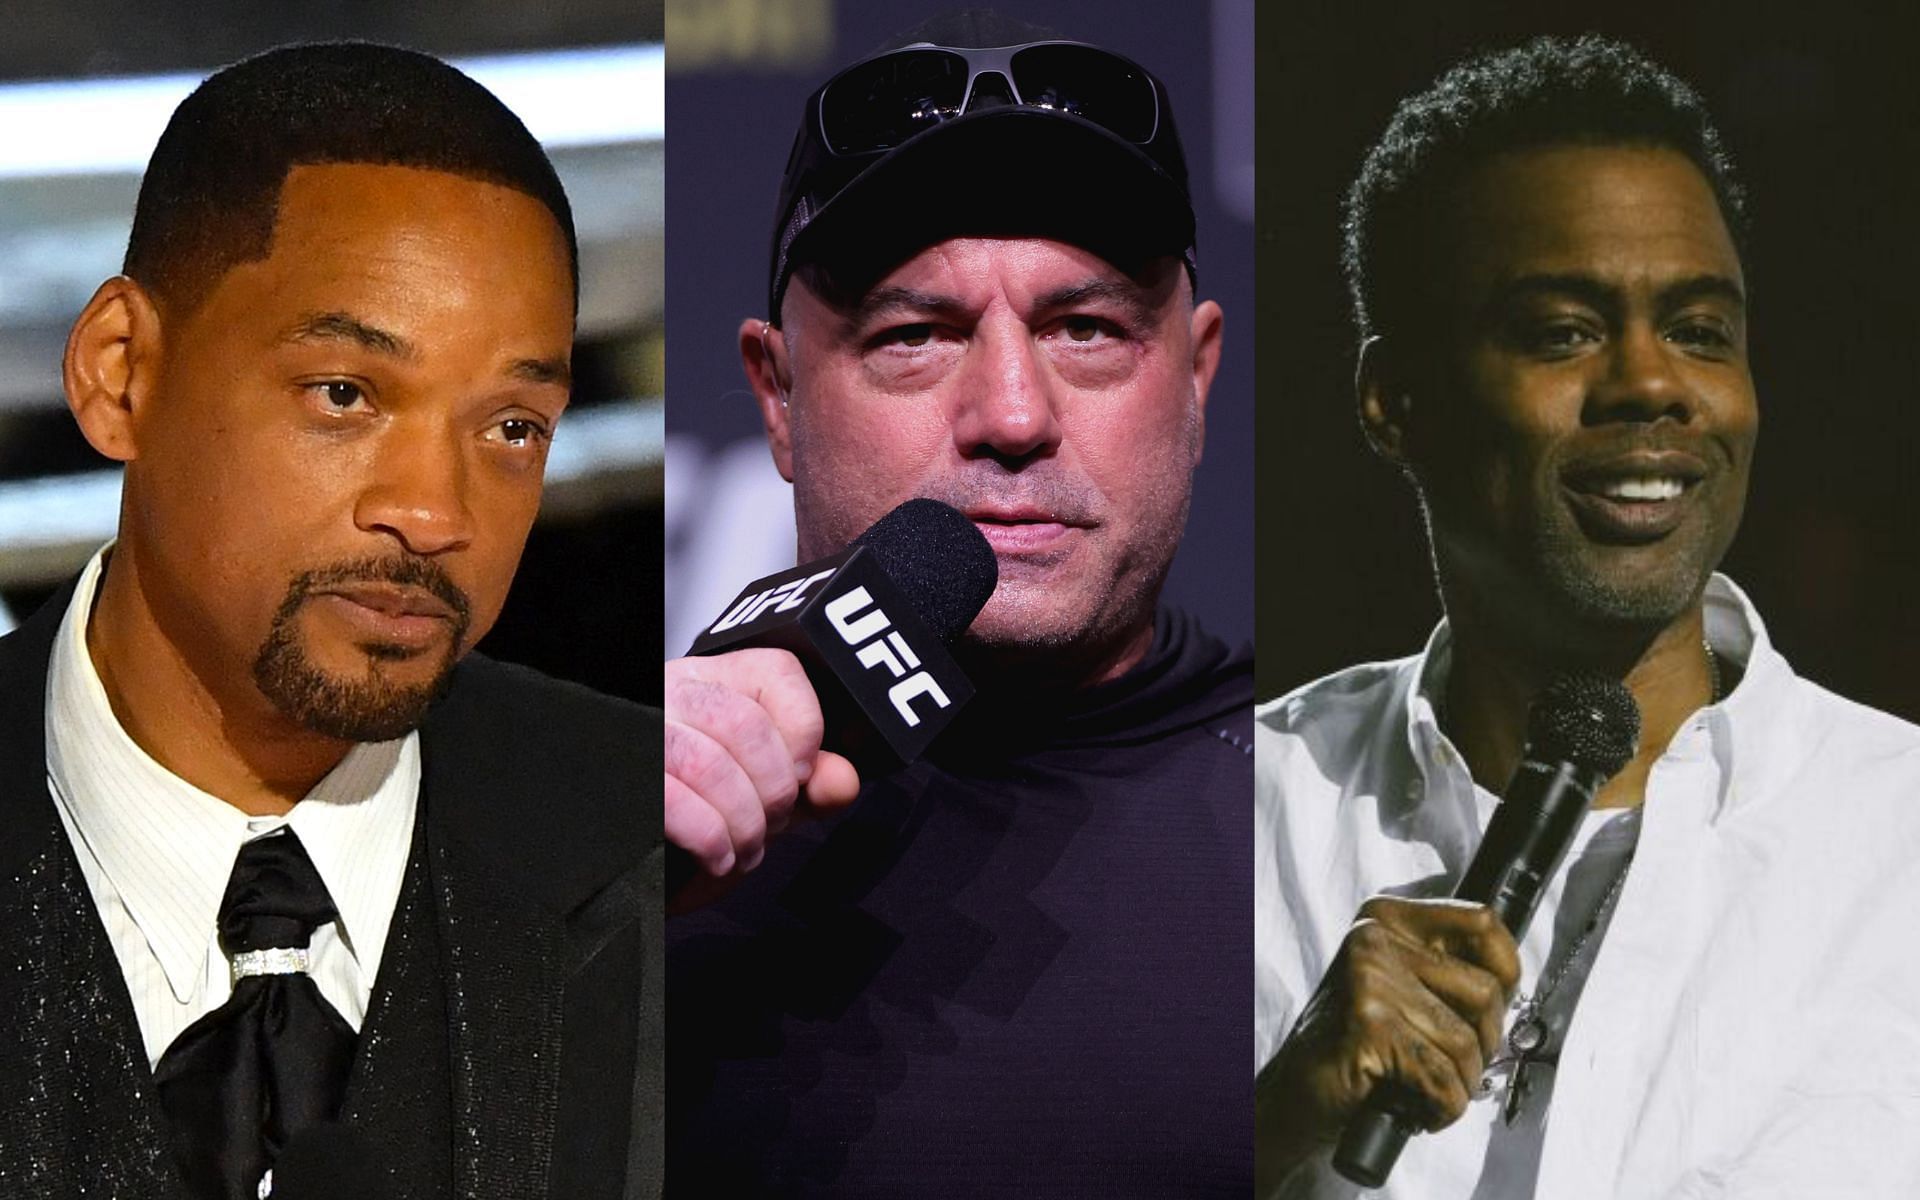 Will Smith (left), Joe Rogan (centre), and Chris Rock (right). [Images courtesy: left image from today.com, centre image from Getty Images, and right image from Netflix]